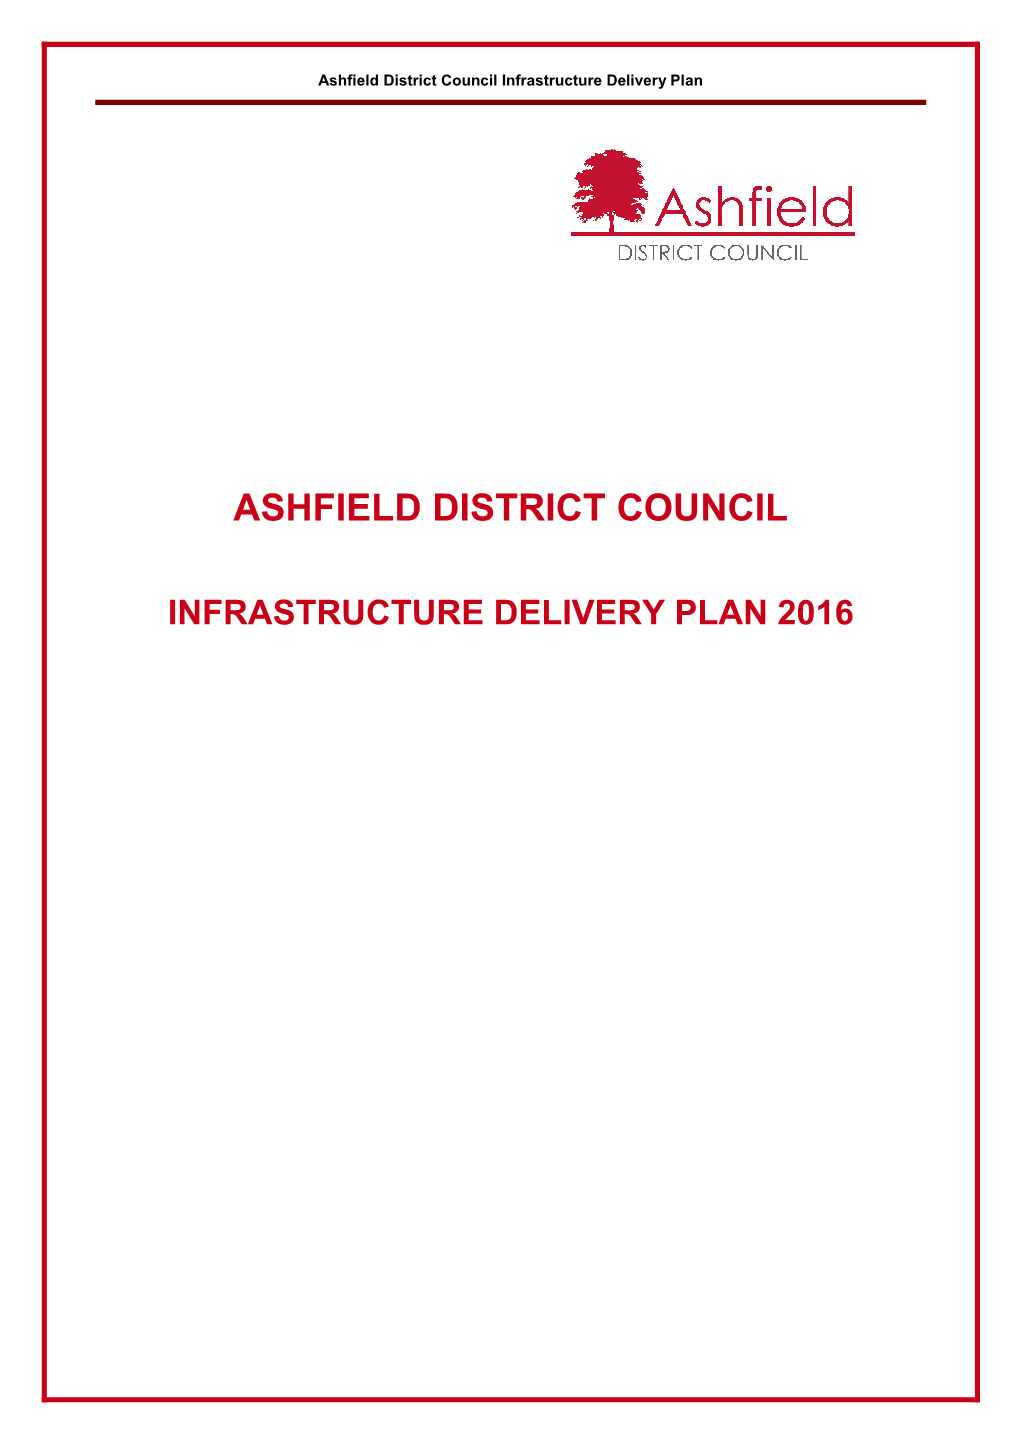 Infrastructure Delivery Plan